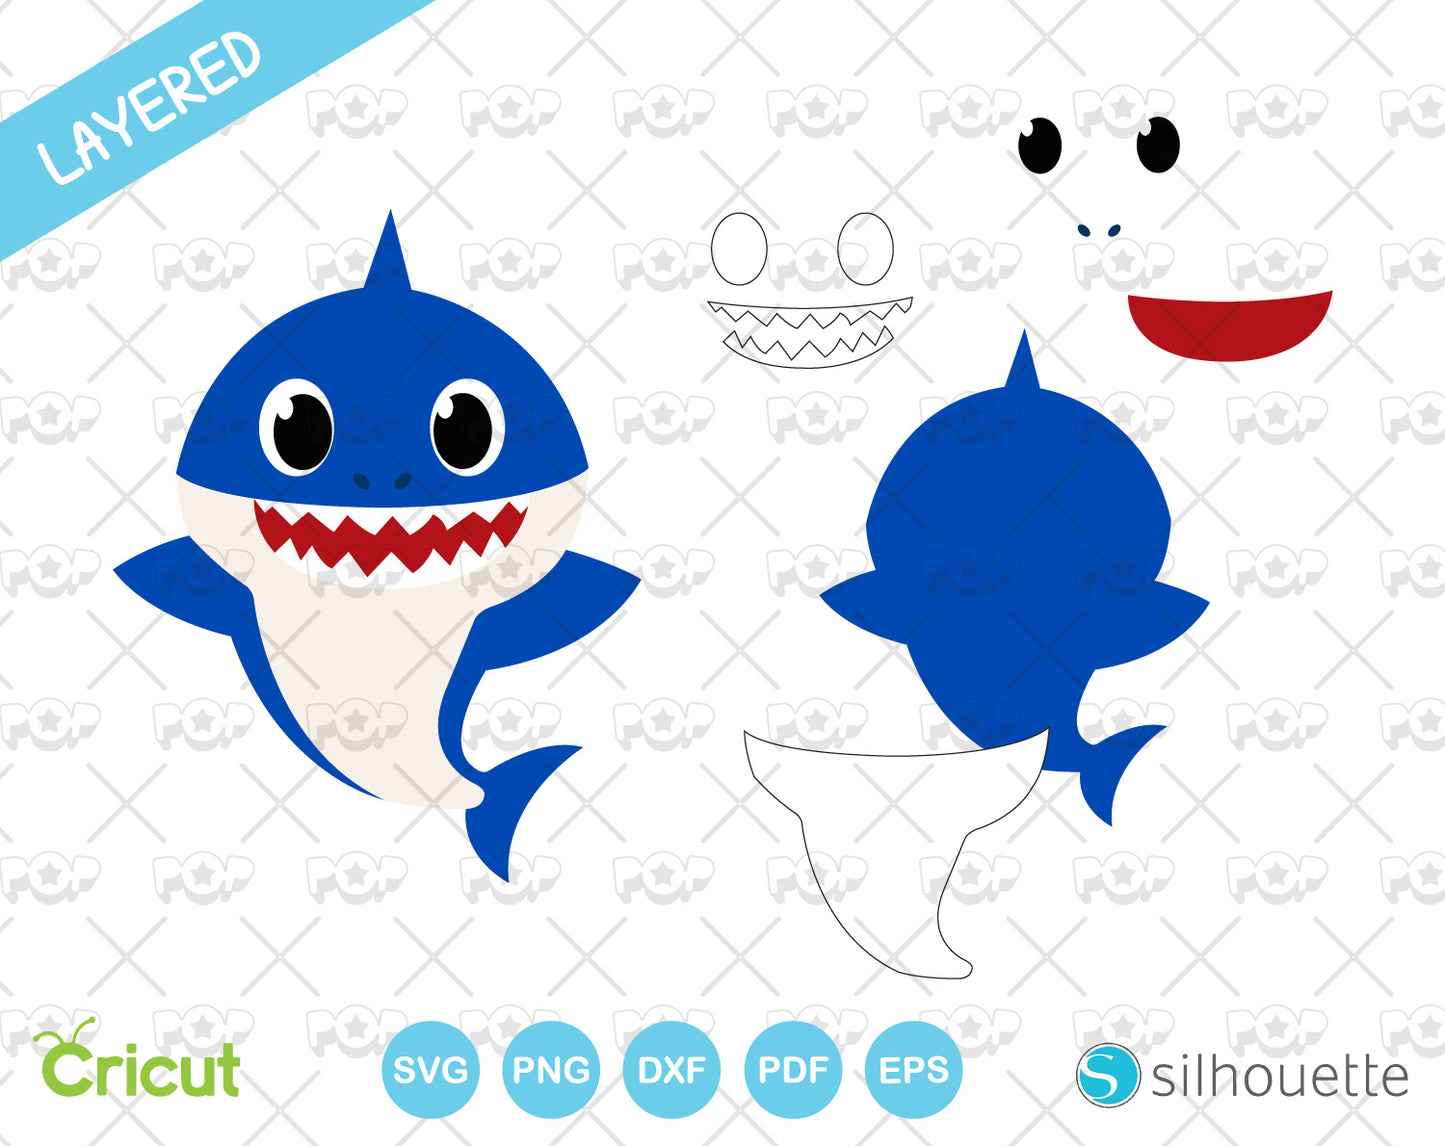 Baby Shark clipart bundle, SVG cut files for Cricut / Silhouette, SVG, PNG, DXF, instant download